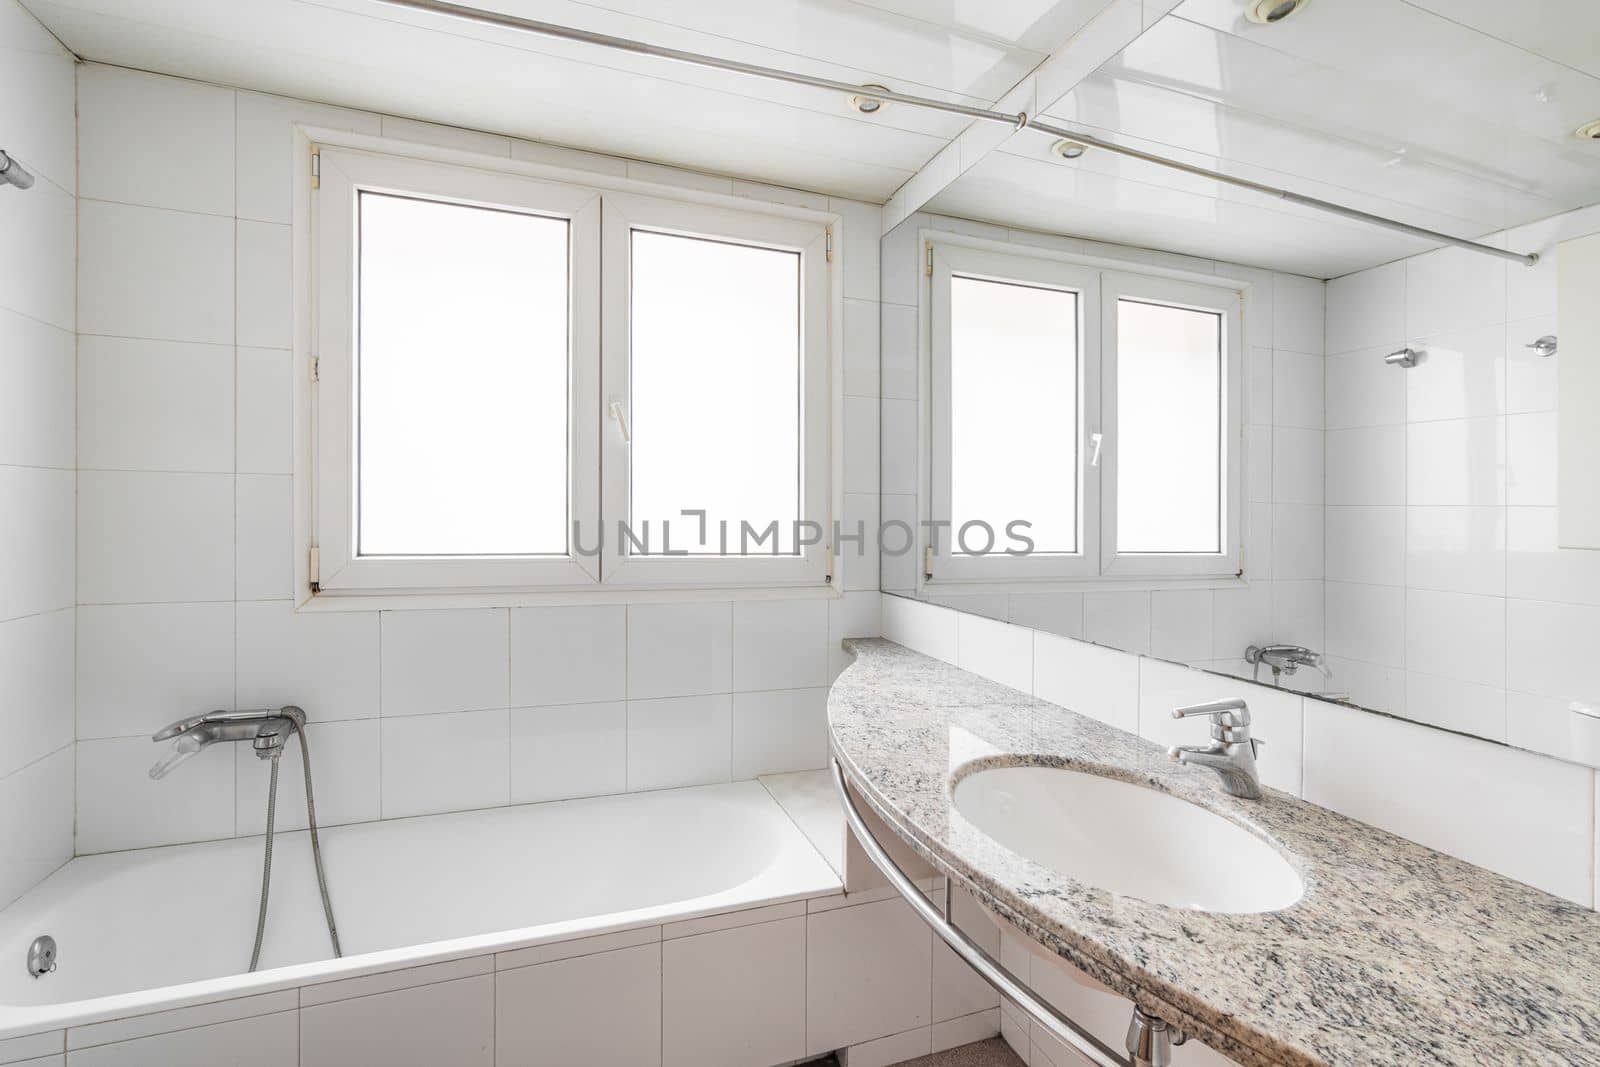 White bathroom with large hot tub. On the wall are two plastic windows with frosted glass through which daylight shines. Nearby is a sink on a marble countertop with a large mirror on the wall. by apavlin